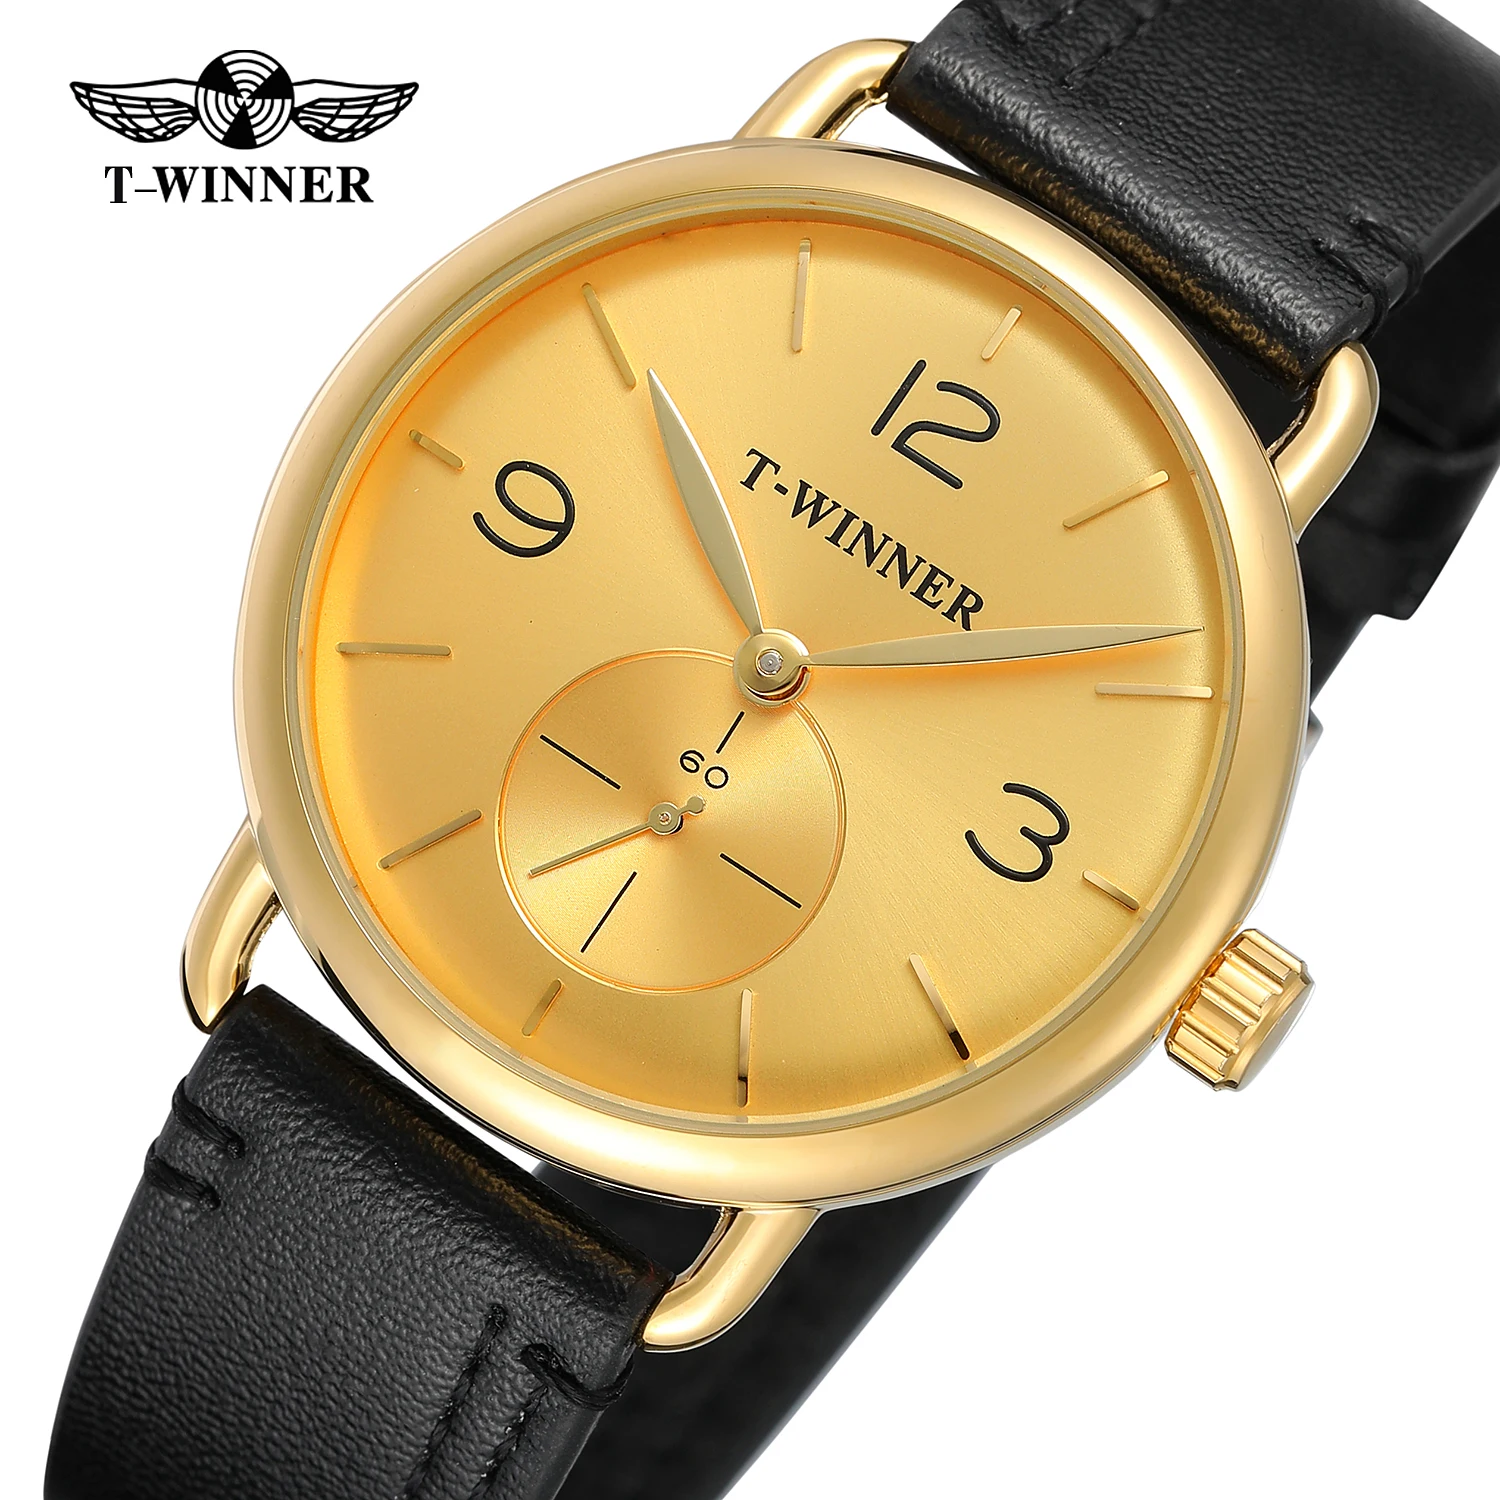 

T-winner Top Brand 2019 New Arrival Best Watches For Men Online Mechanical Hand Wind Trendy Dial Leather Strap Casual Wristwatch